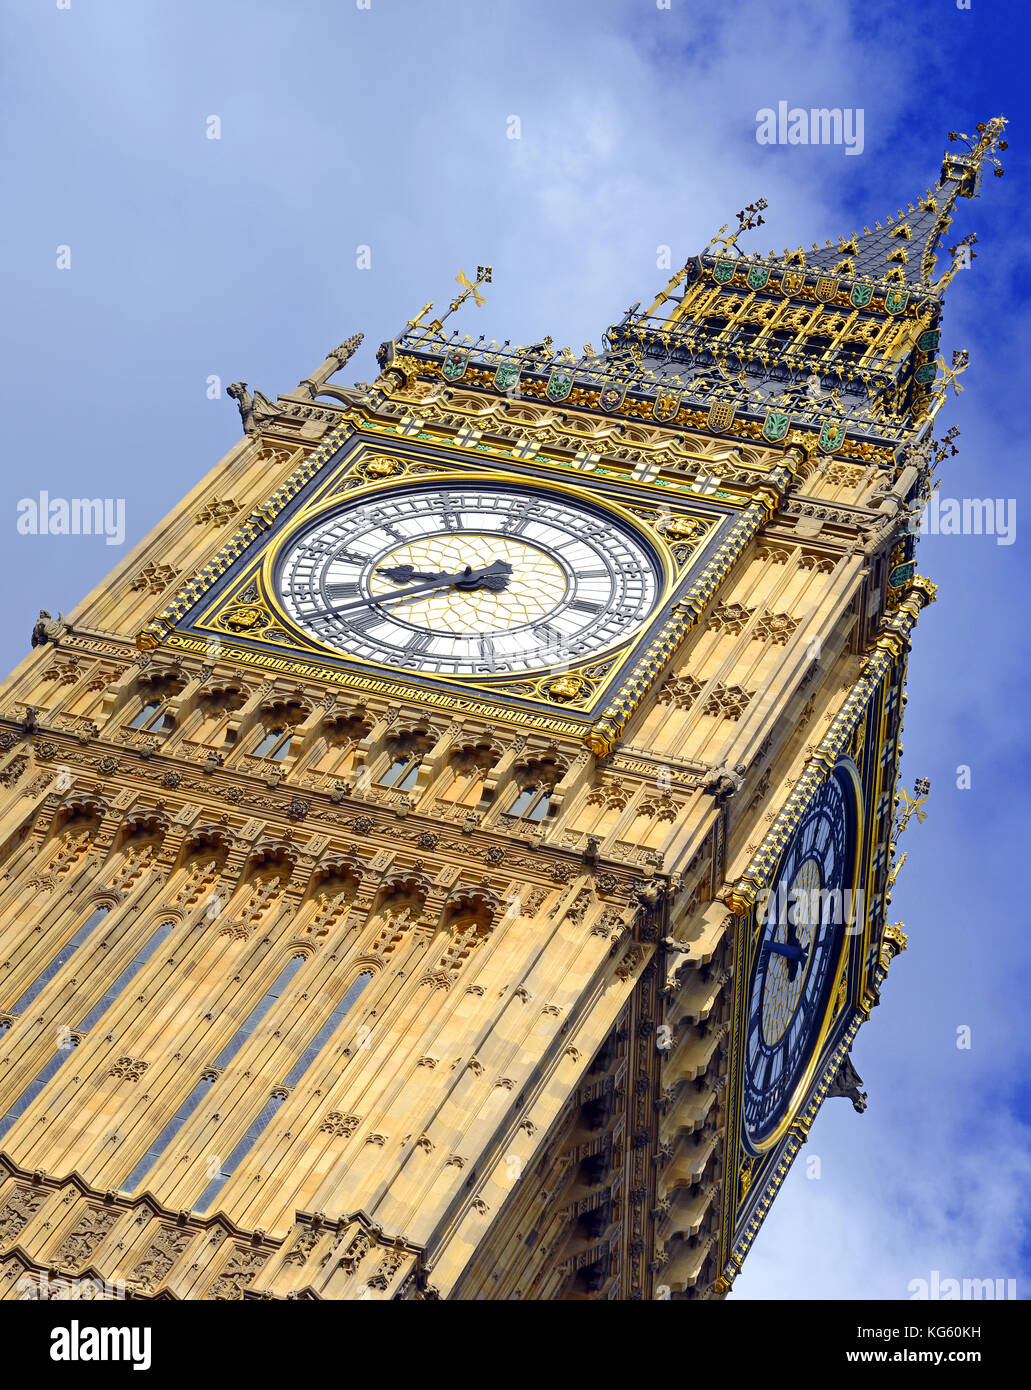 Big Ben clock tower, also known as Elizabeth Tower near Westminster Palace and Houses of Parliament in London England has become a symbol of England a Stock Photo